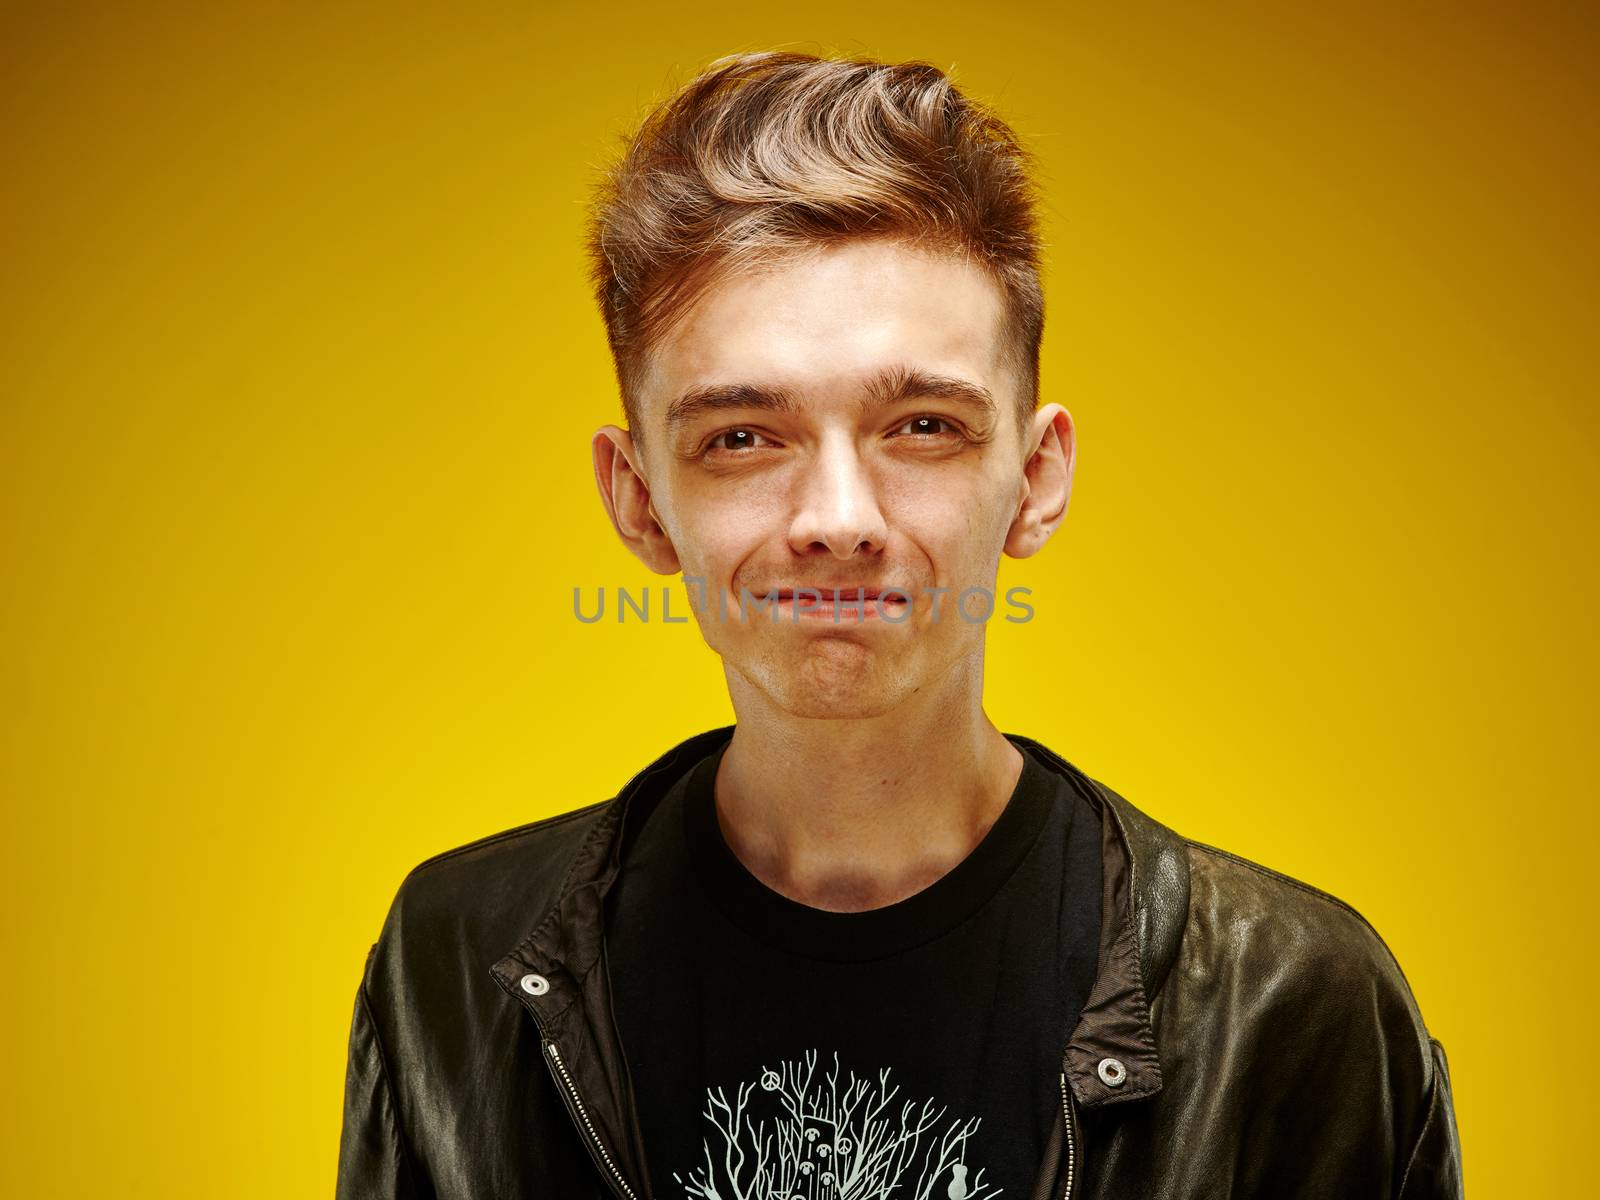 Emotional portrait of a teenager on a yellow background